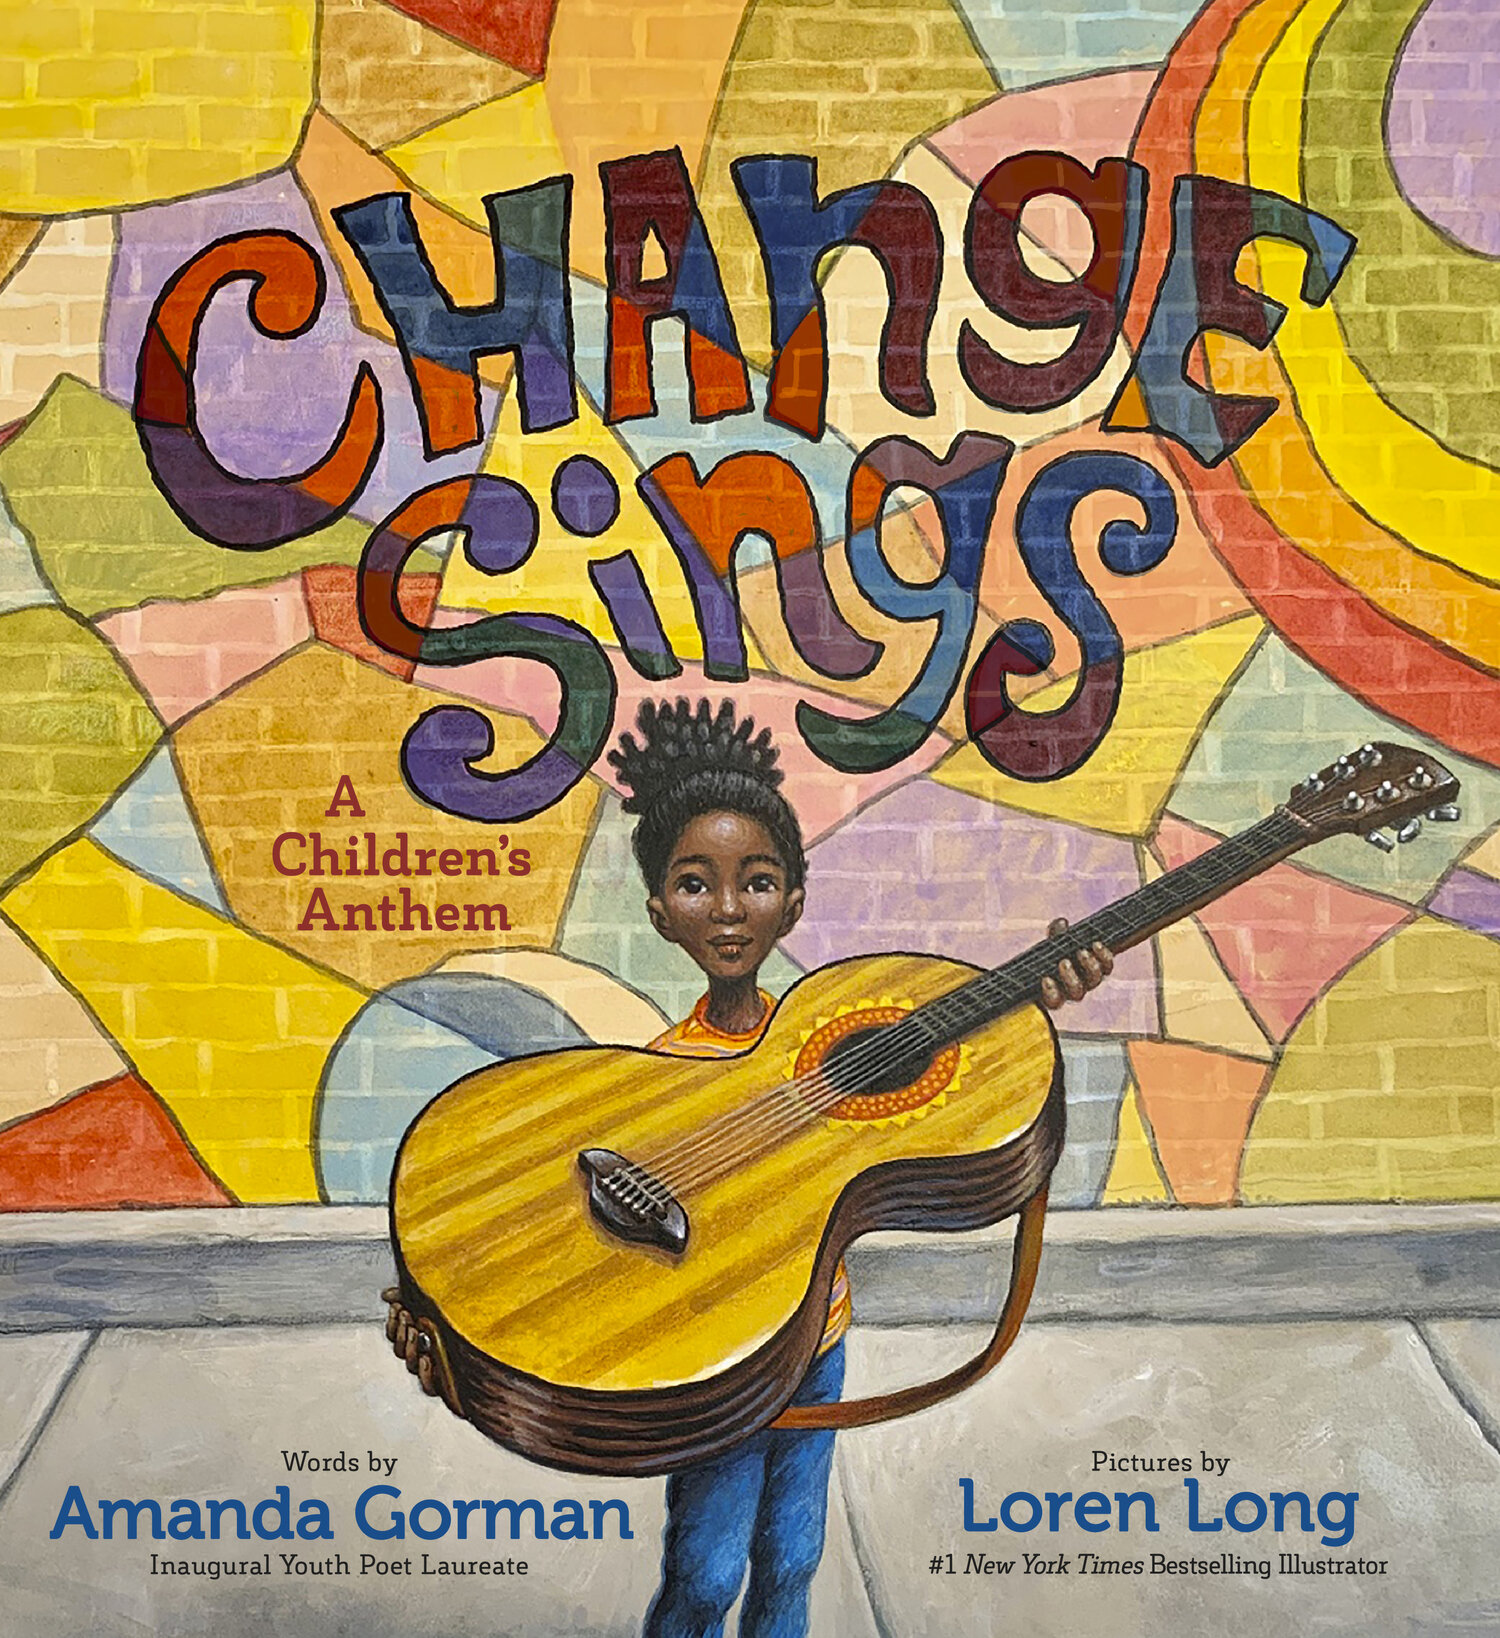 Change Sings  is brought to life by #1  New York Times  bestselling illustrator Loren Long, the artist behind Barack Obama’s children’s book  Of Thee I Sing: A Letter to My Daughters . Written as a children’s anthem, Gorman’s book reminds the newest generation that they have the power to shape the word with their actions and voices.